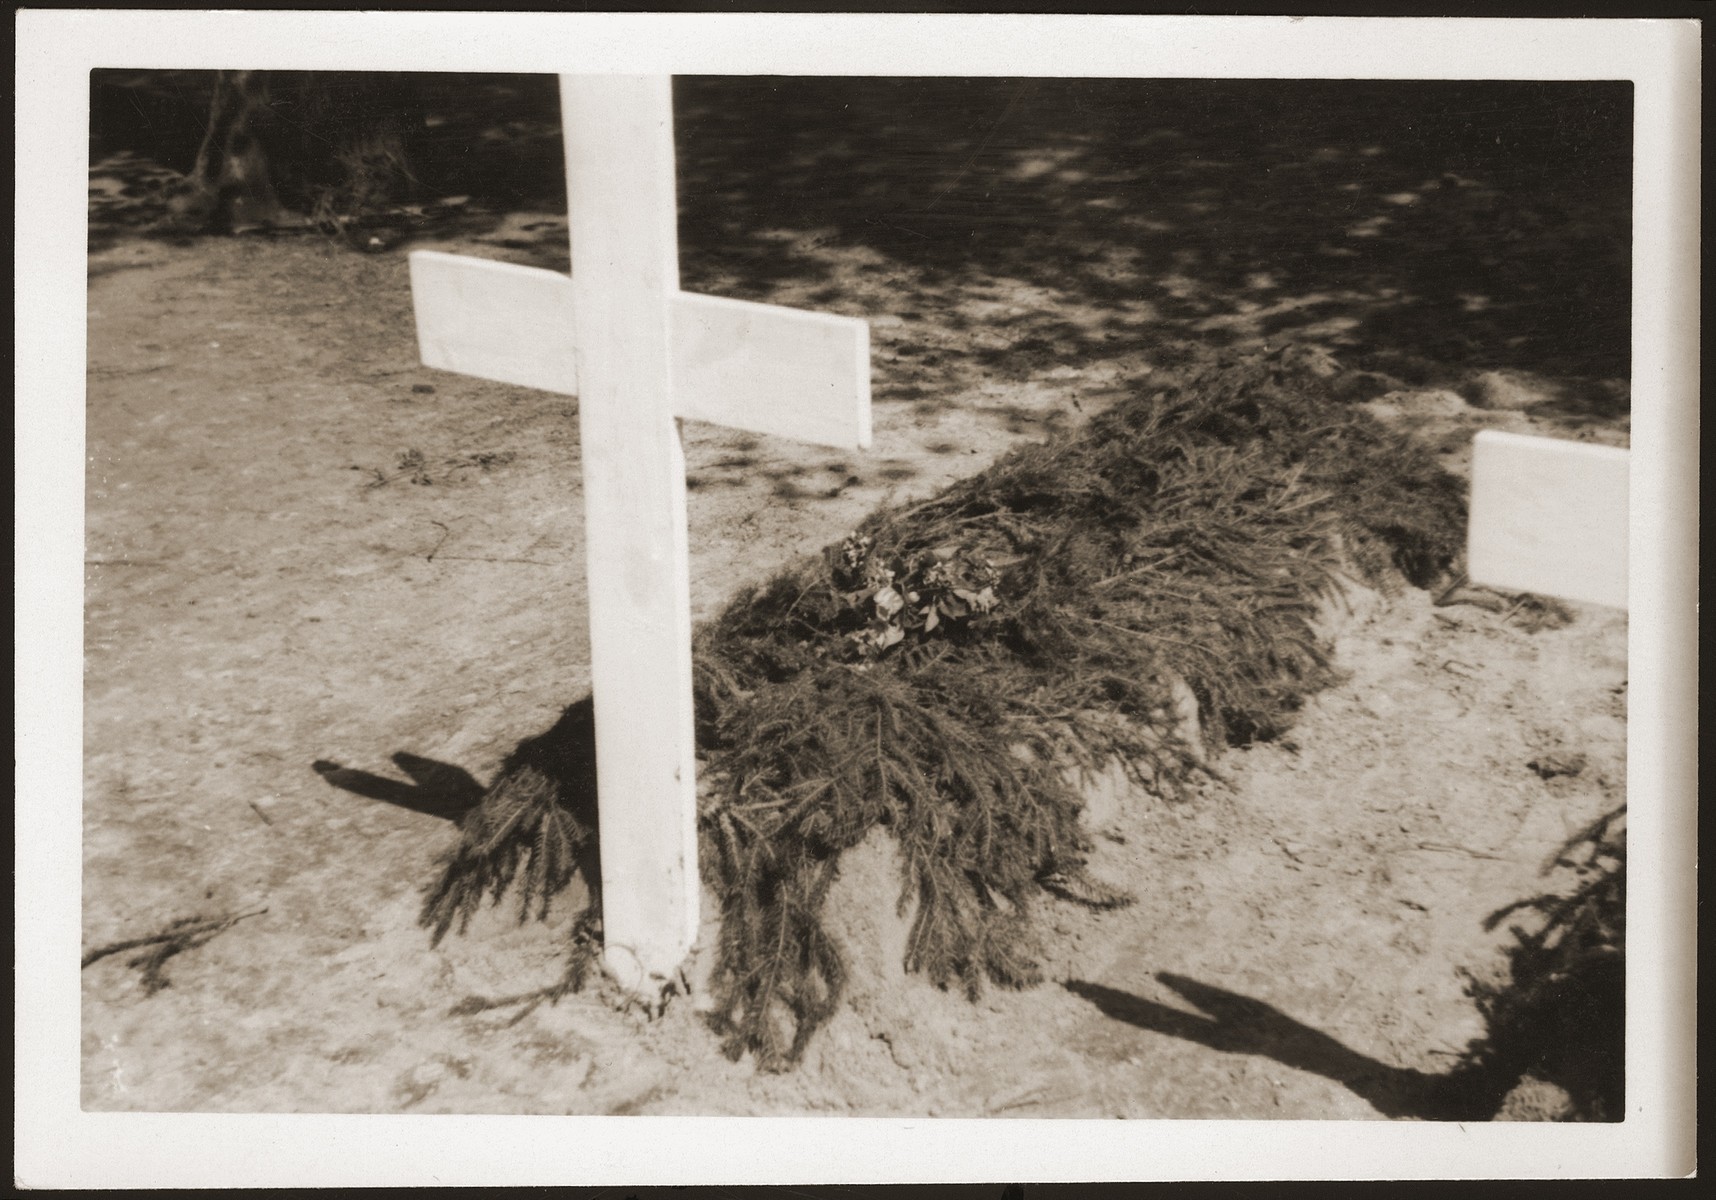 One of 200 graves dug by the people of Ludwigslust on the palace grounds of the Archduke of Mecklenburg, where they have been forced by U.S. troops to bury the bodies of prisoners killed in the Woebbelin concentration camp.